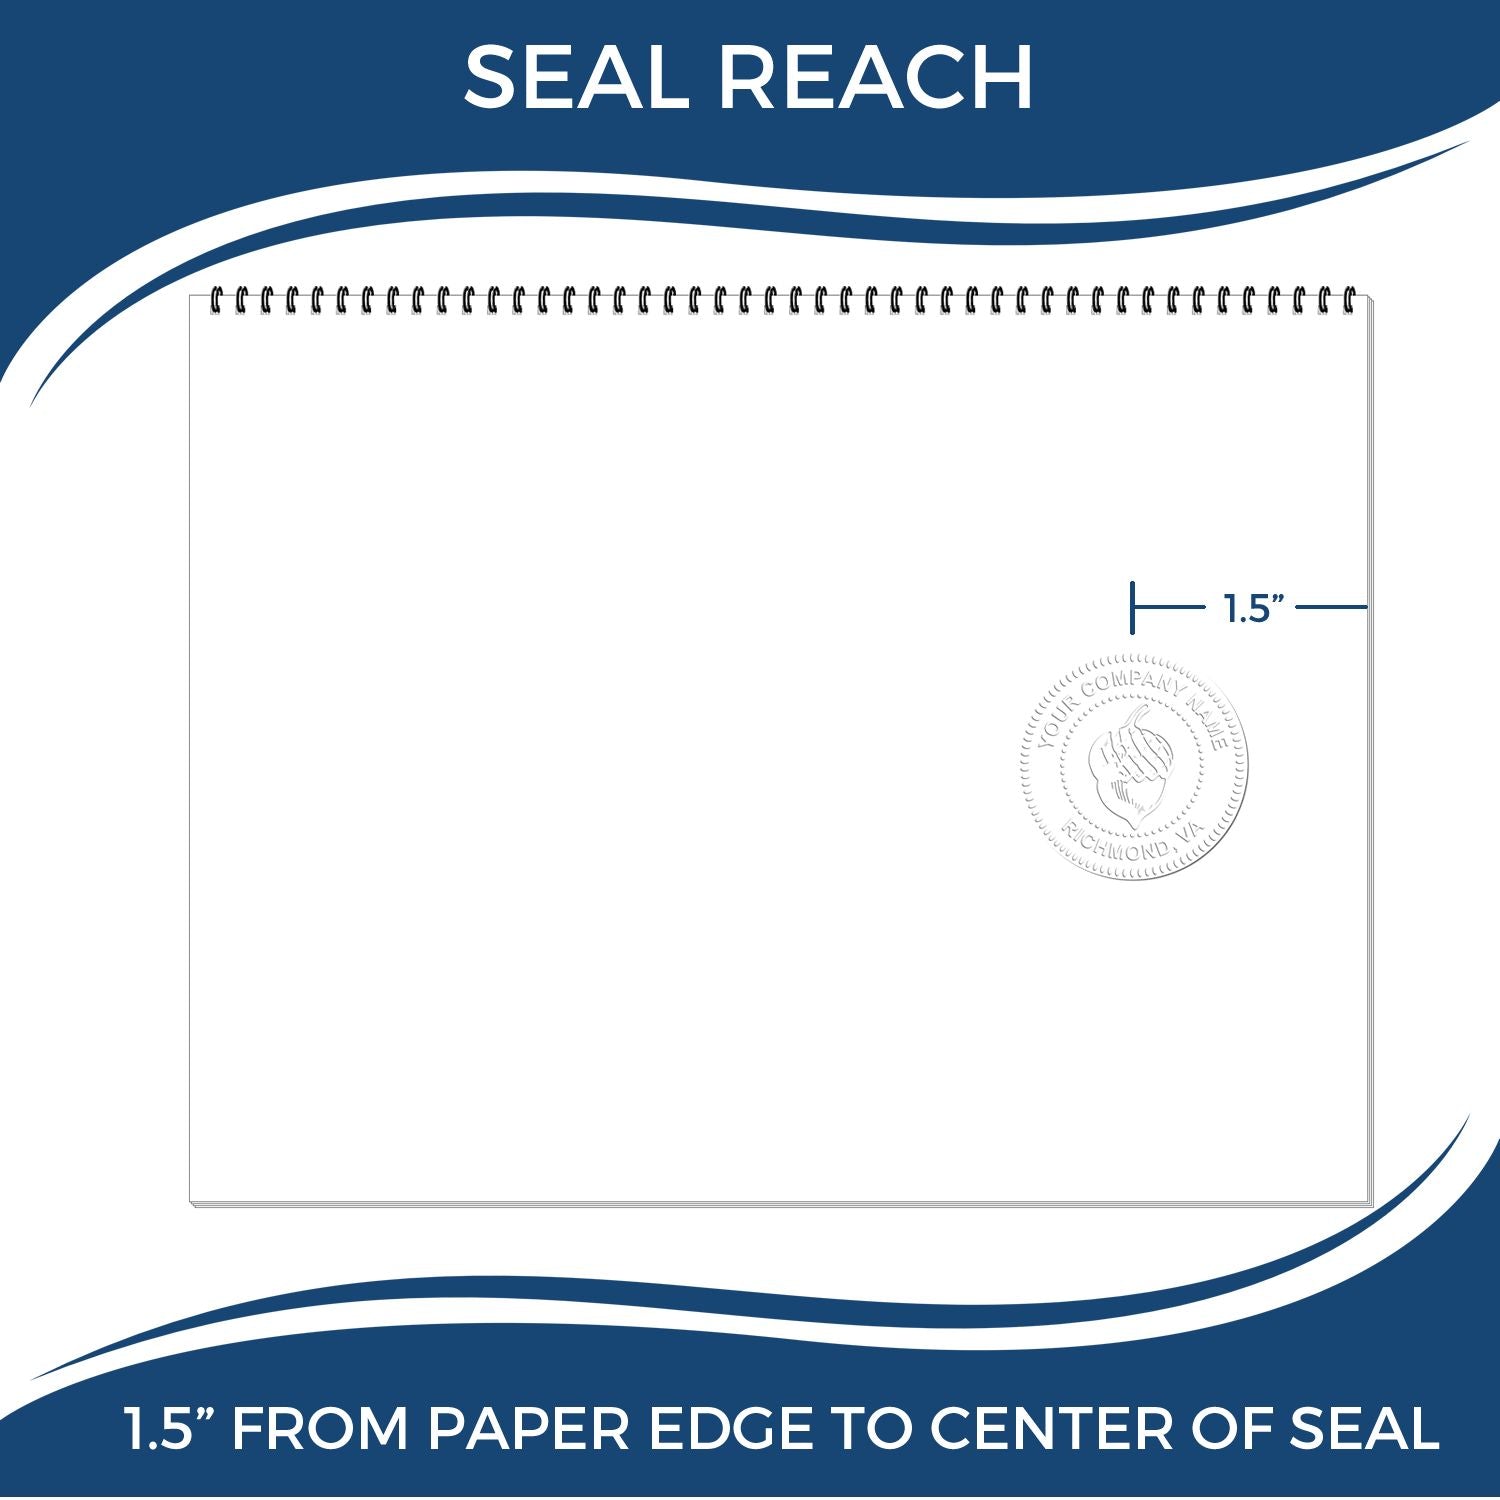 An infographic showing the seal reach which is represented by a ruler and a miniature seal image of the Tennessee Desk Surveyor Seal Embosser